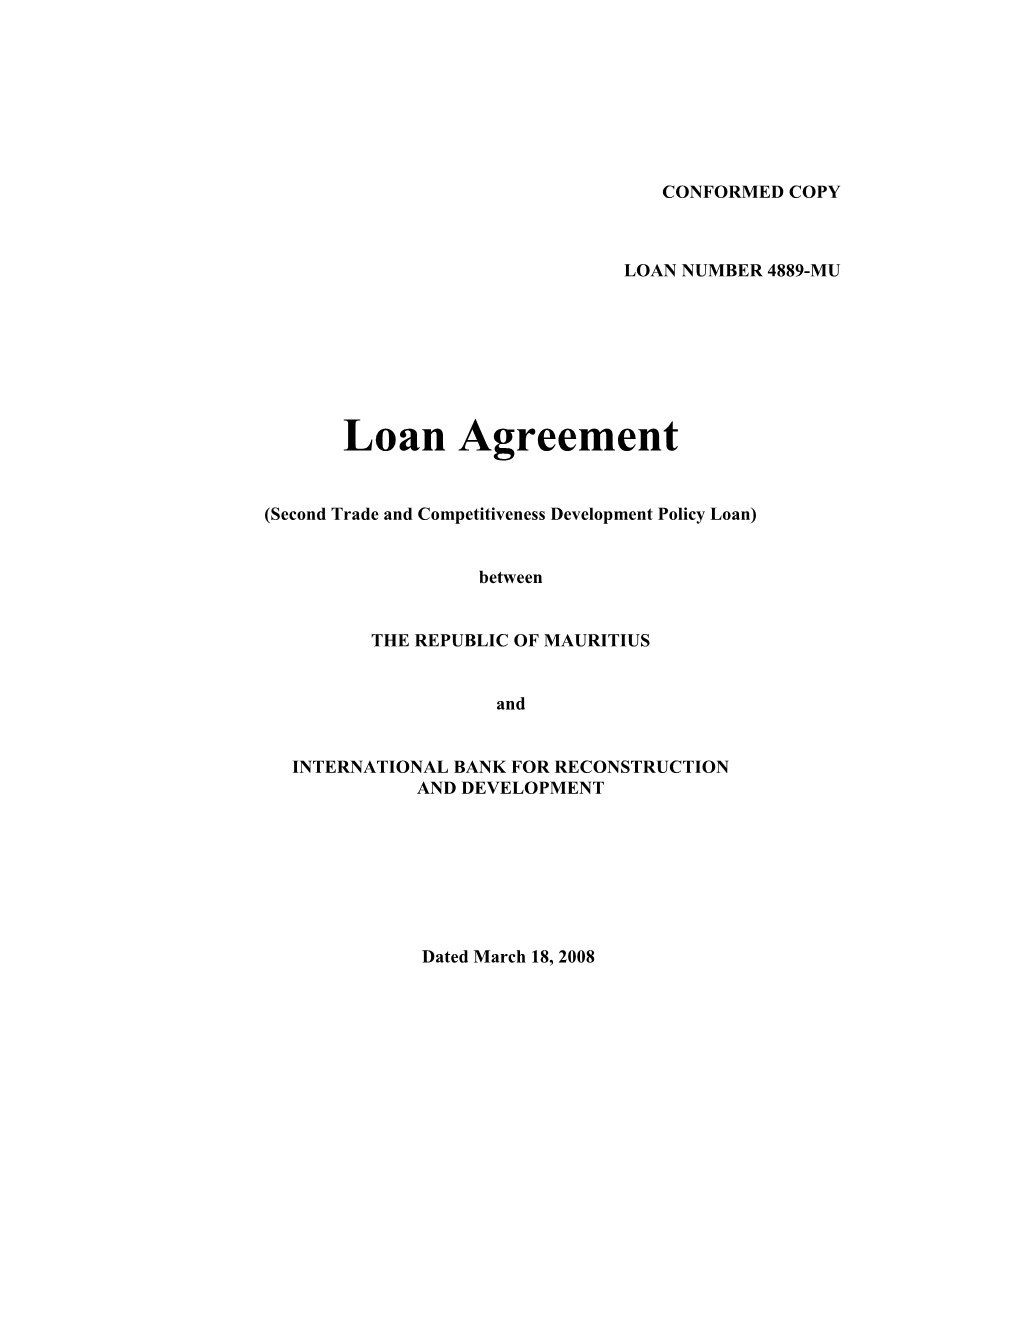 Second Trade and Competitiveness Development Policy Loan